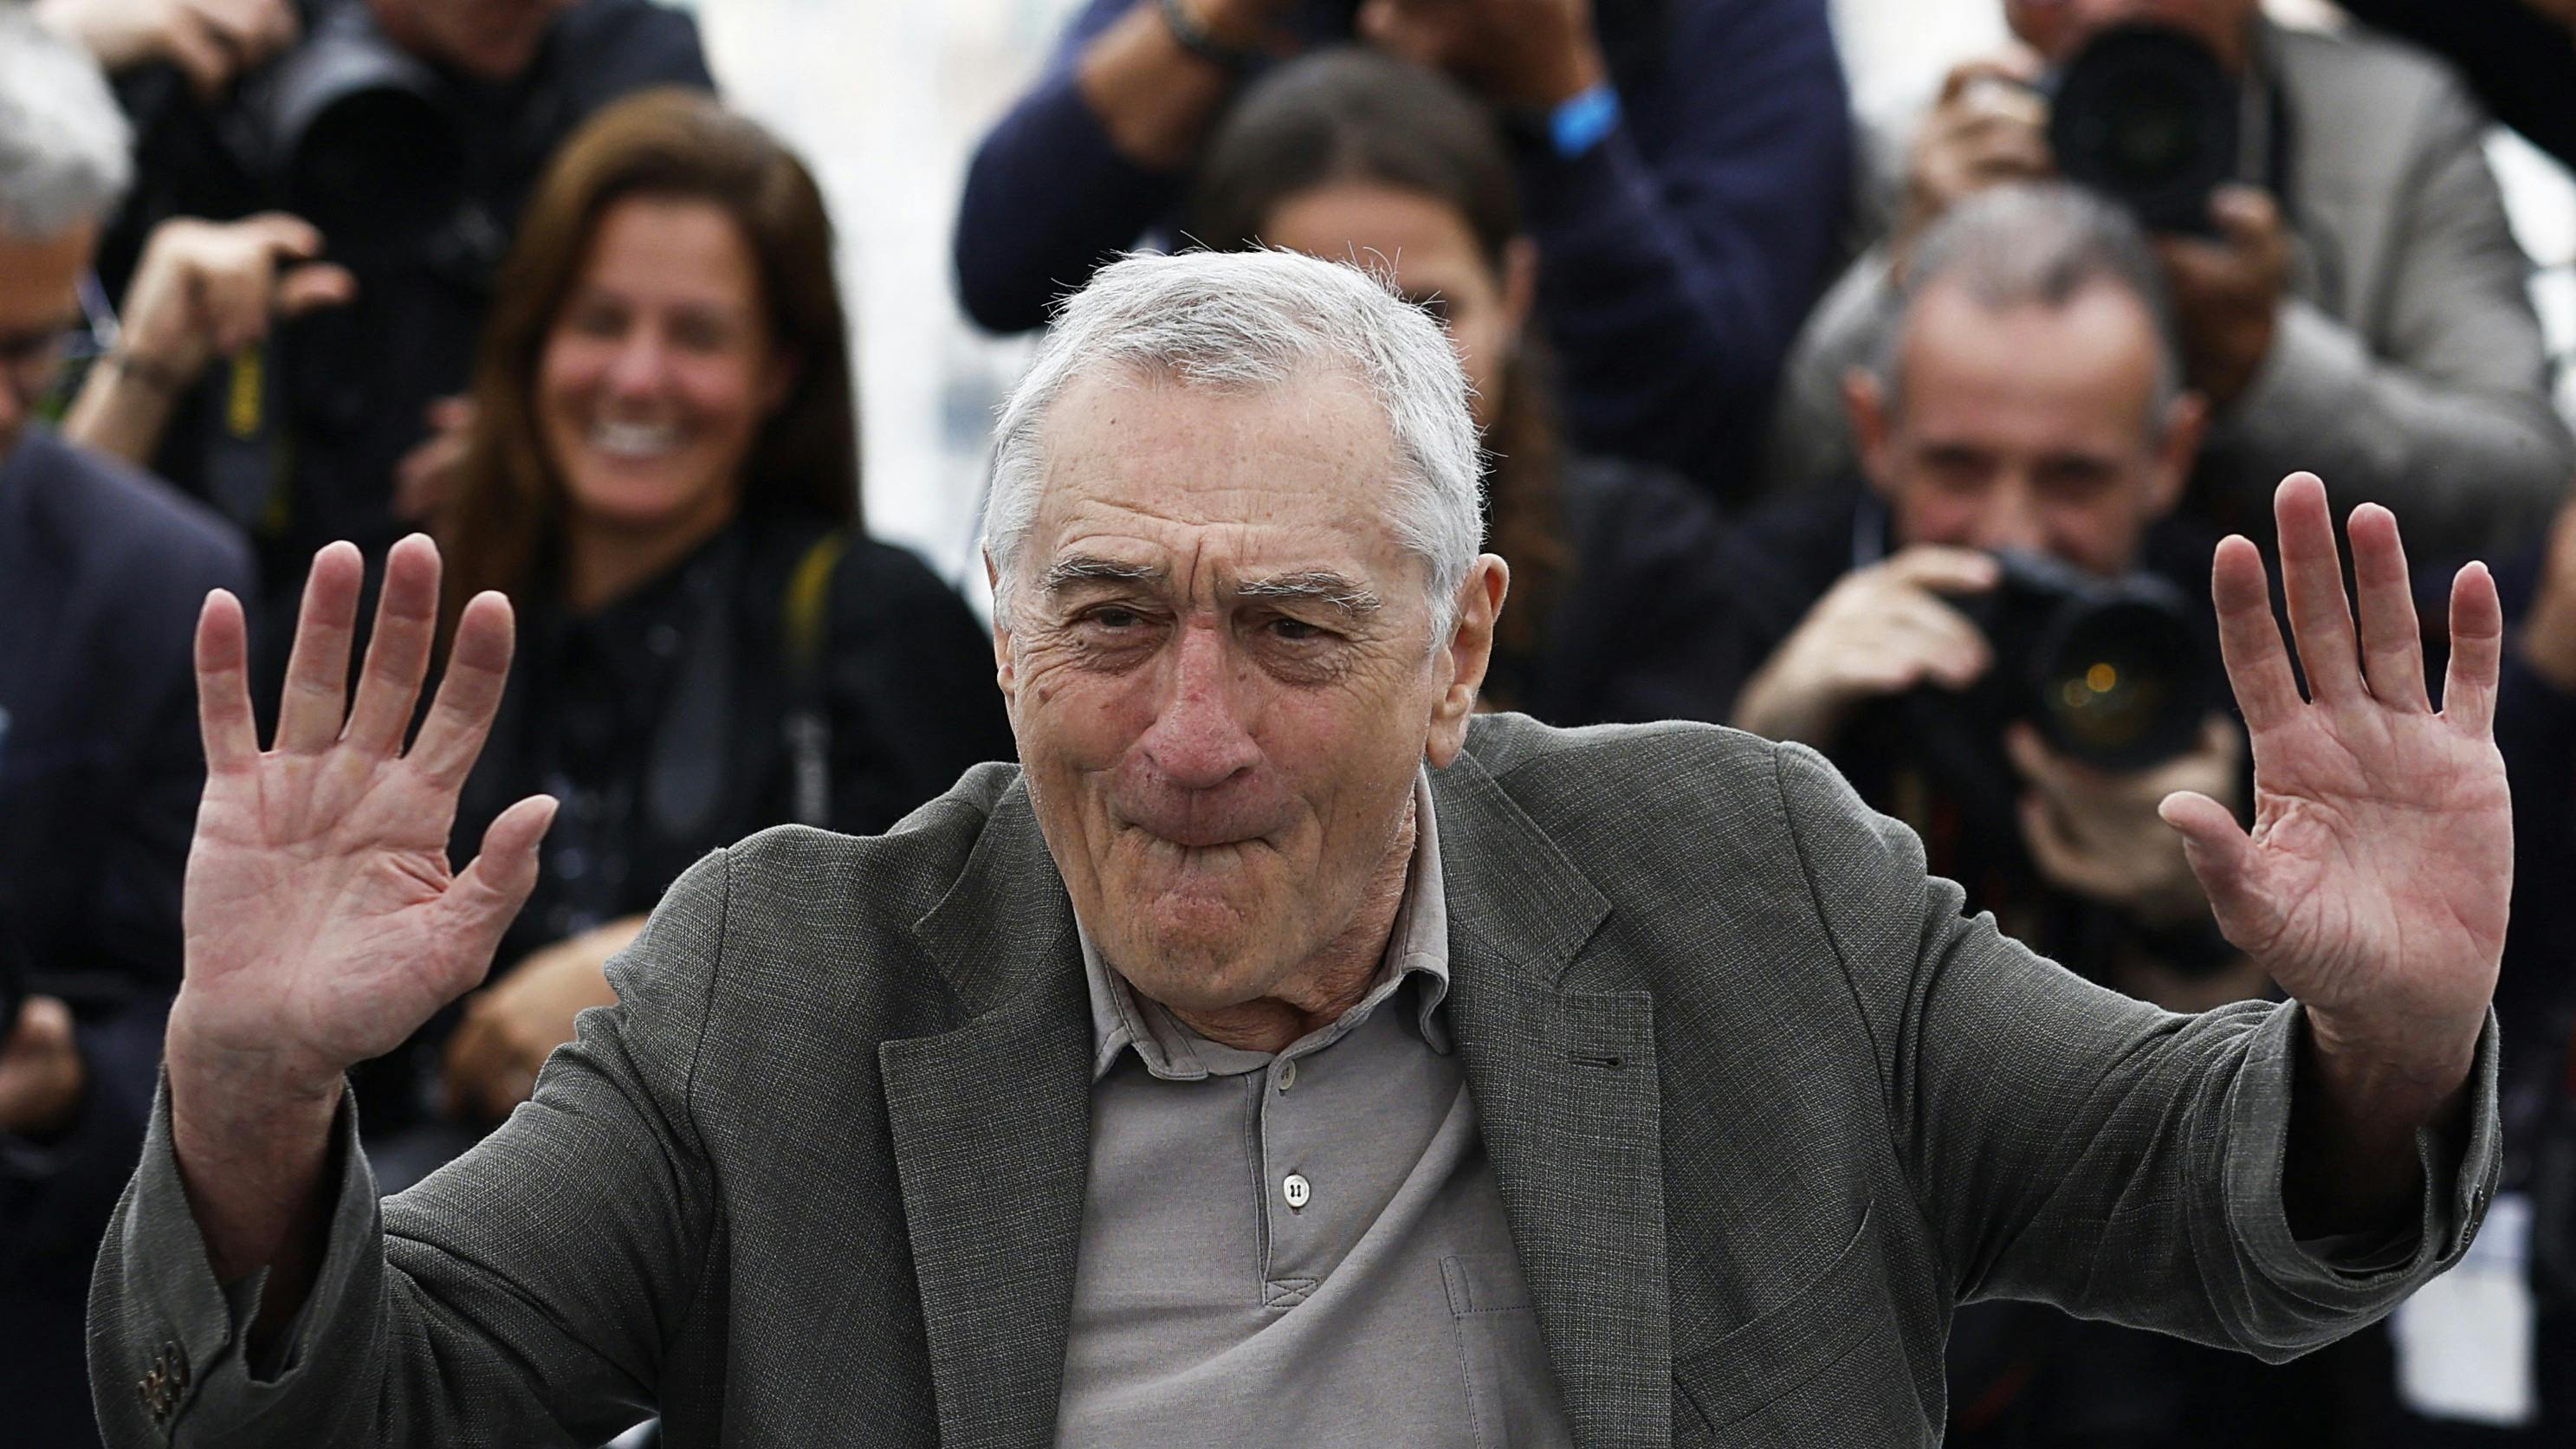 The 76th Cannes Film Festival - Photocall for the film 'Killers of the Flower Moon' Out of Competition - Cannes, France, May 21, 2023. Cast member Robert De Niro poses. REUTERS/Gonzalo Fuentes